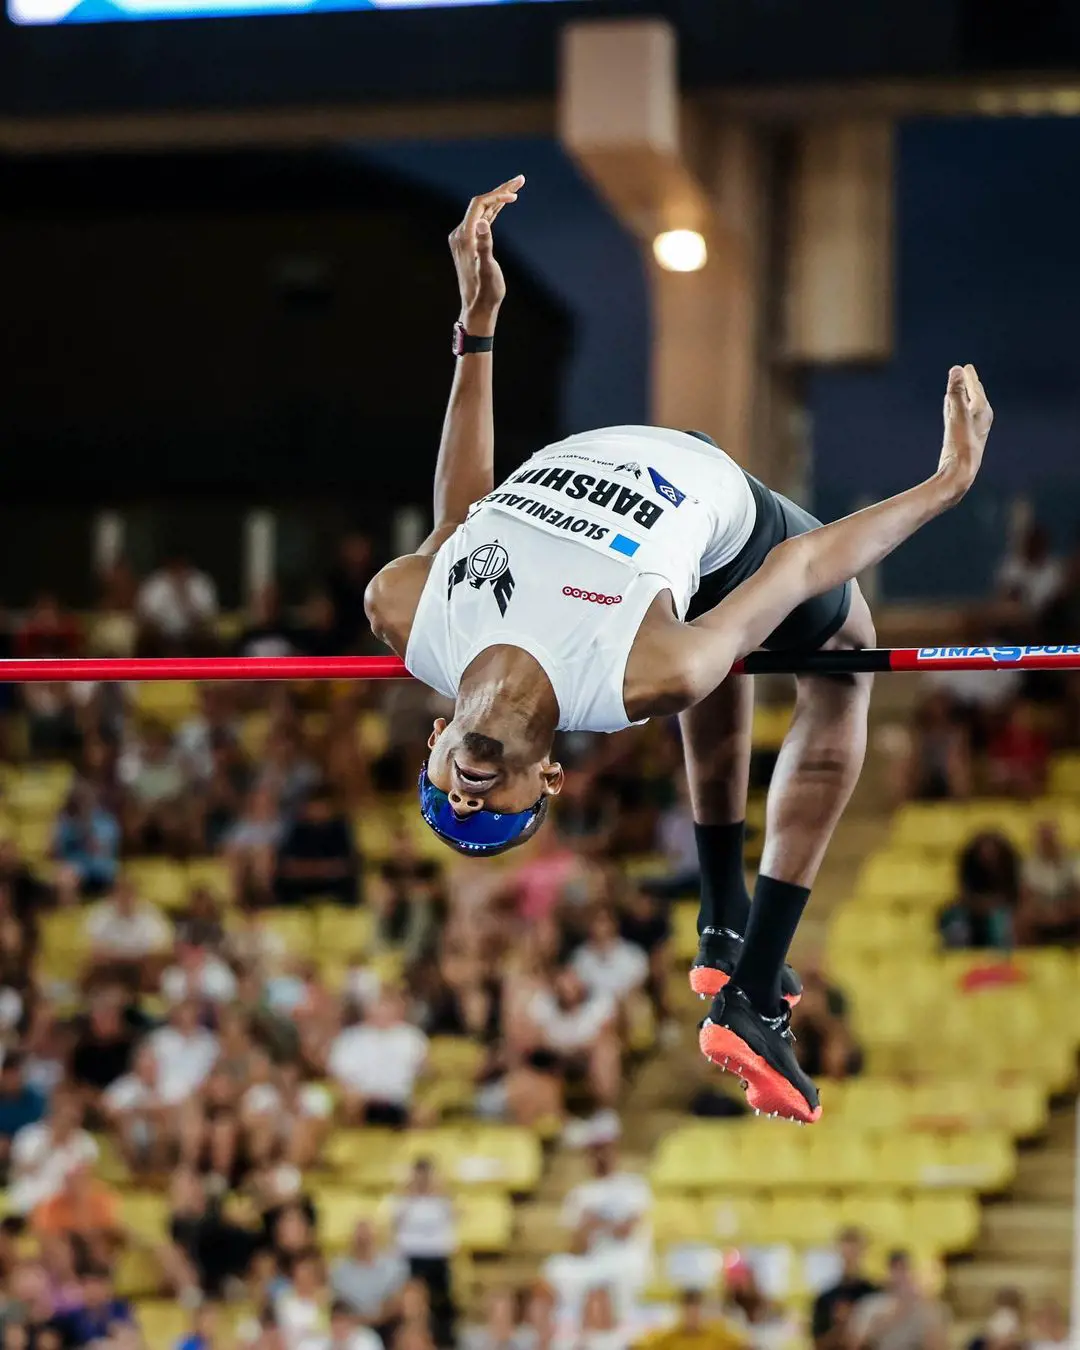 Mutaz Essa Barshim pictured leaping over the bar as he clears 2.30 meters in the Diamond League in 2022